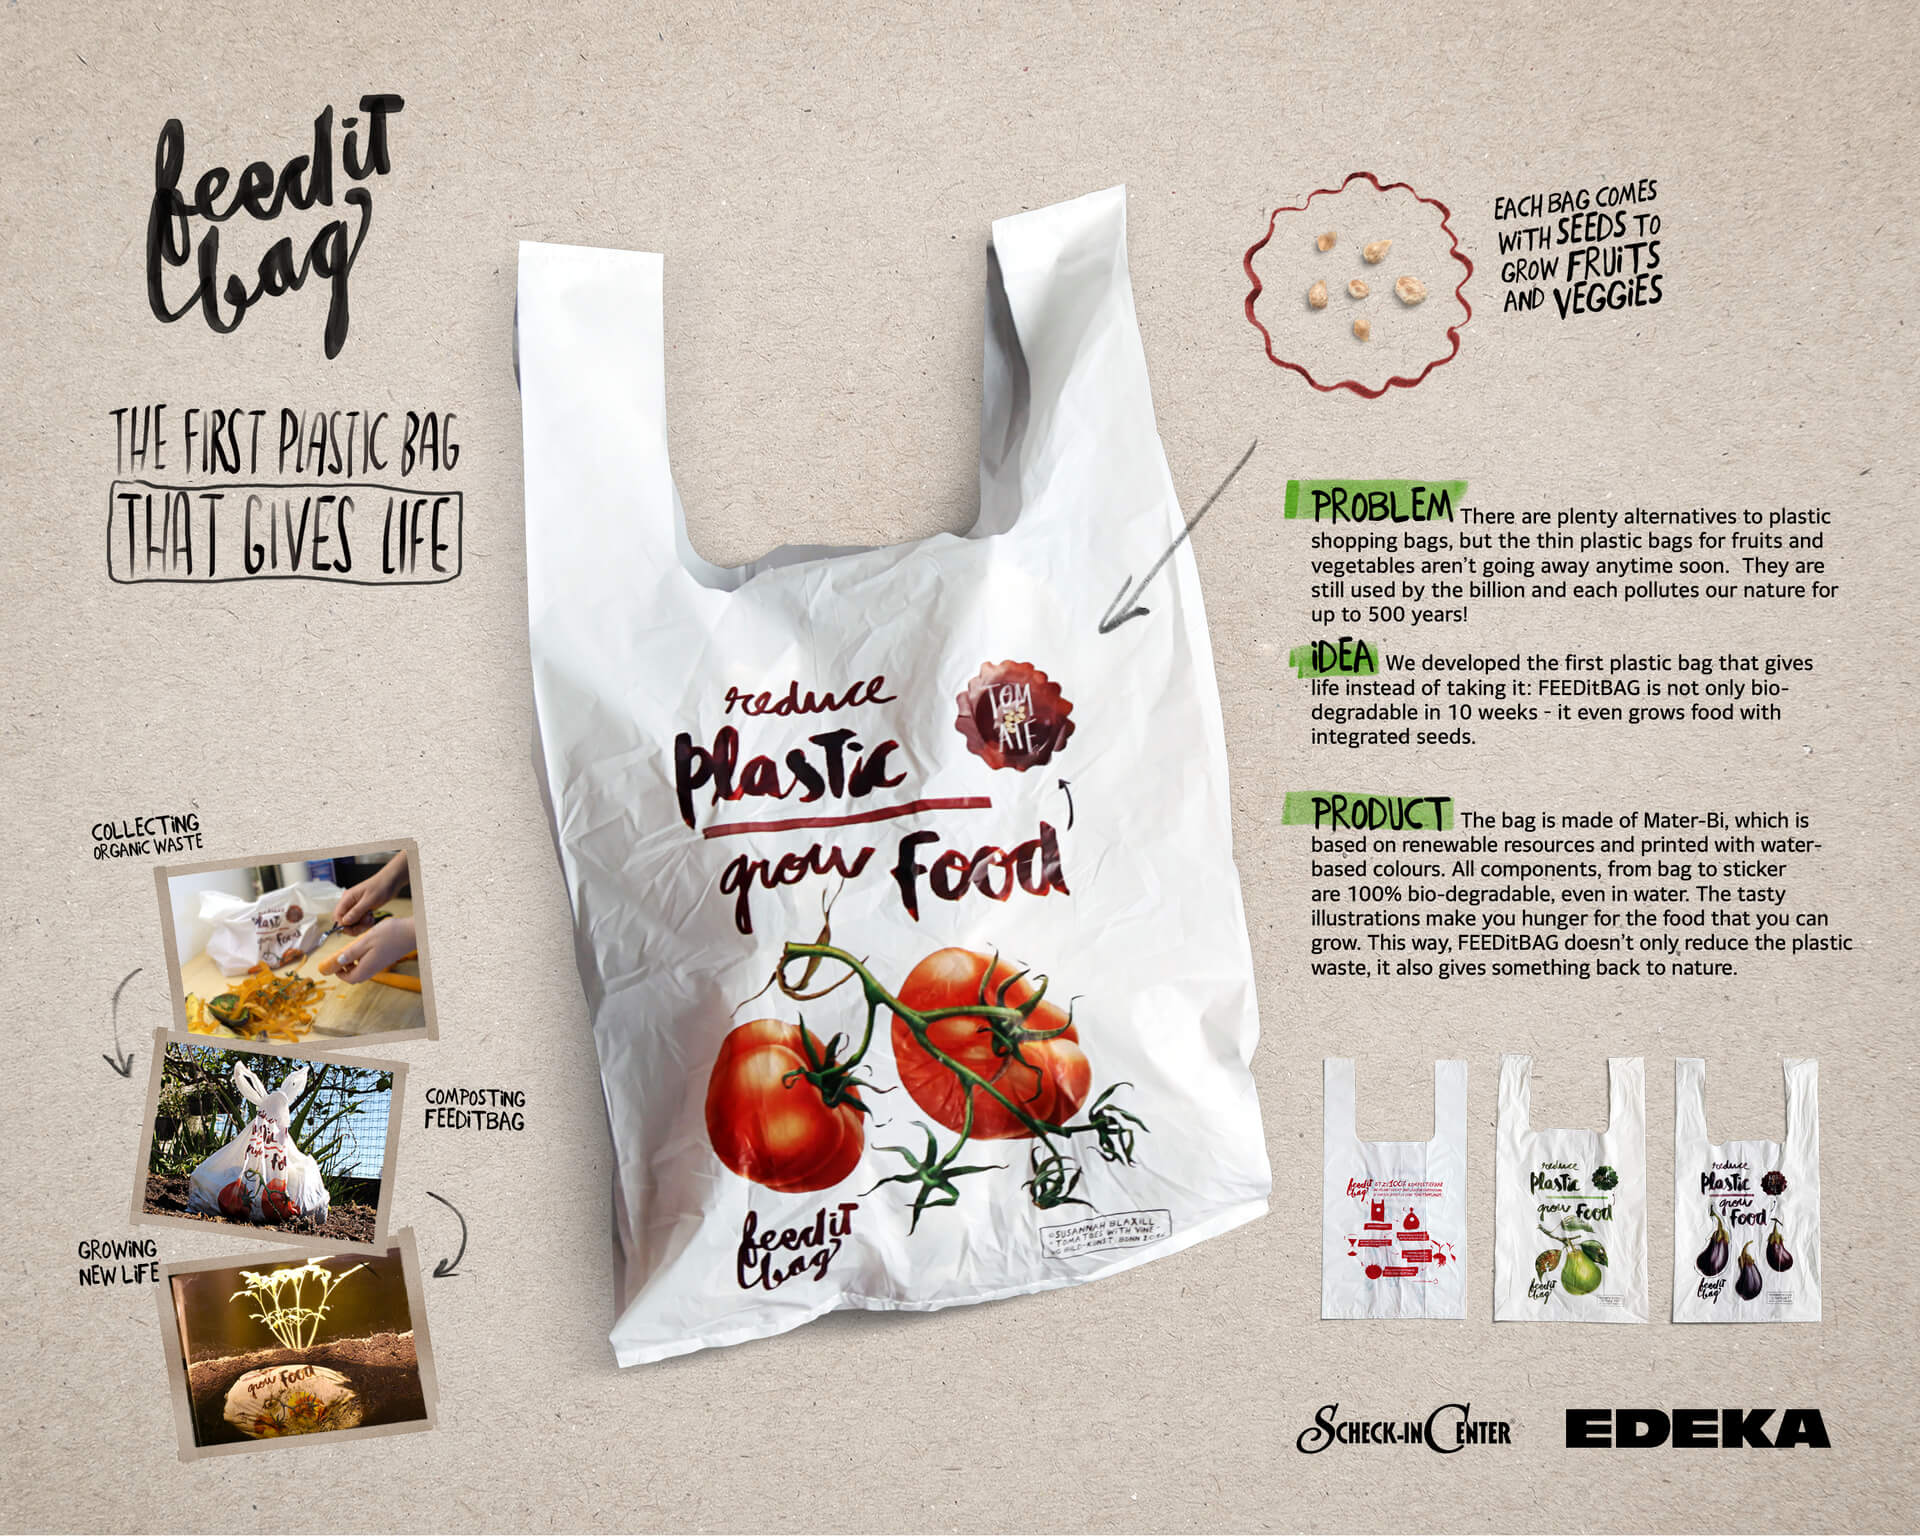 FEEDitBAG by Edeka | A biodegradable bag with built-in seeds